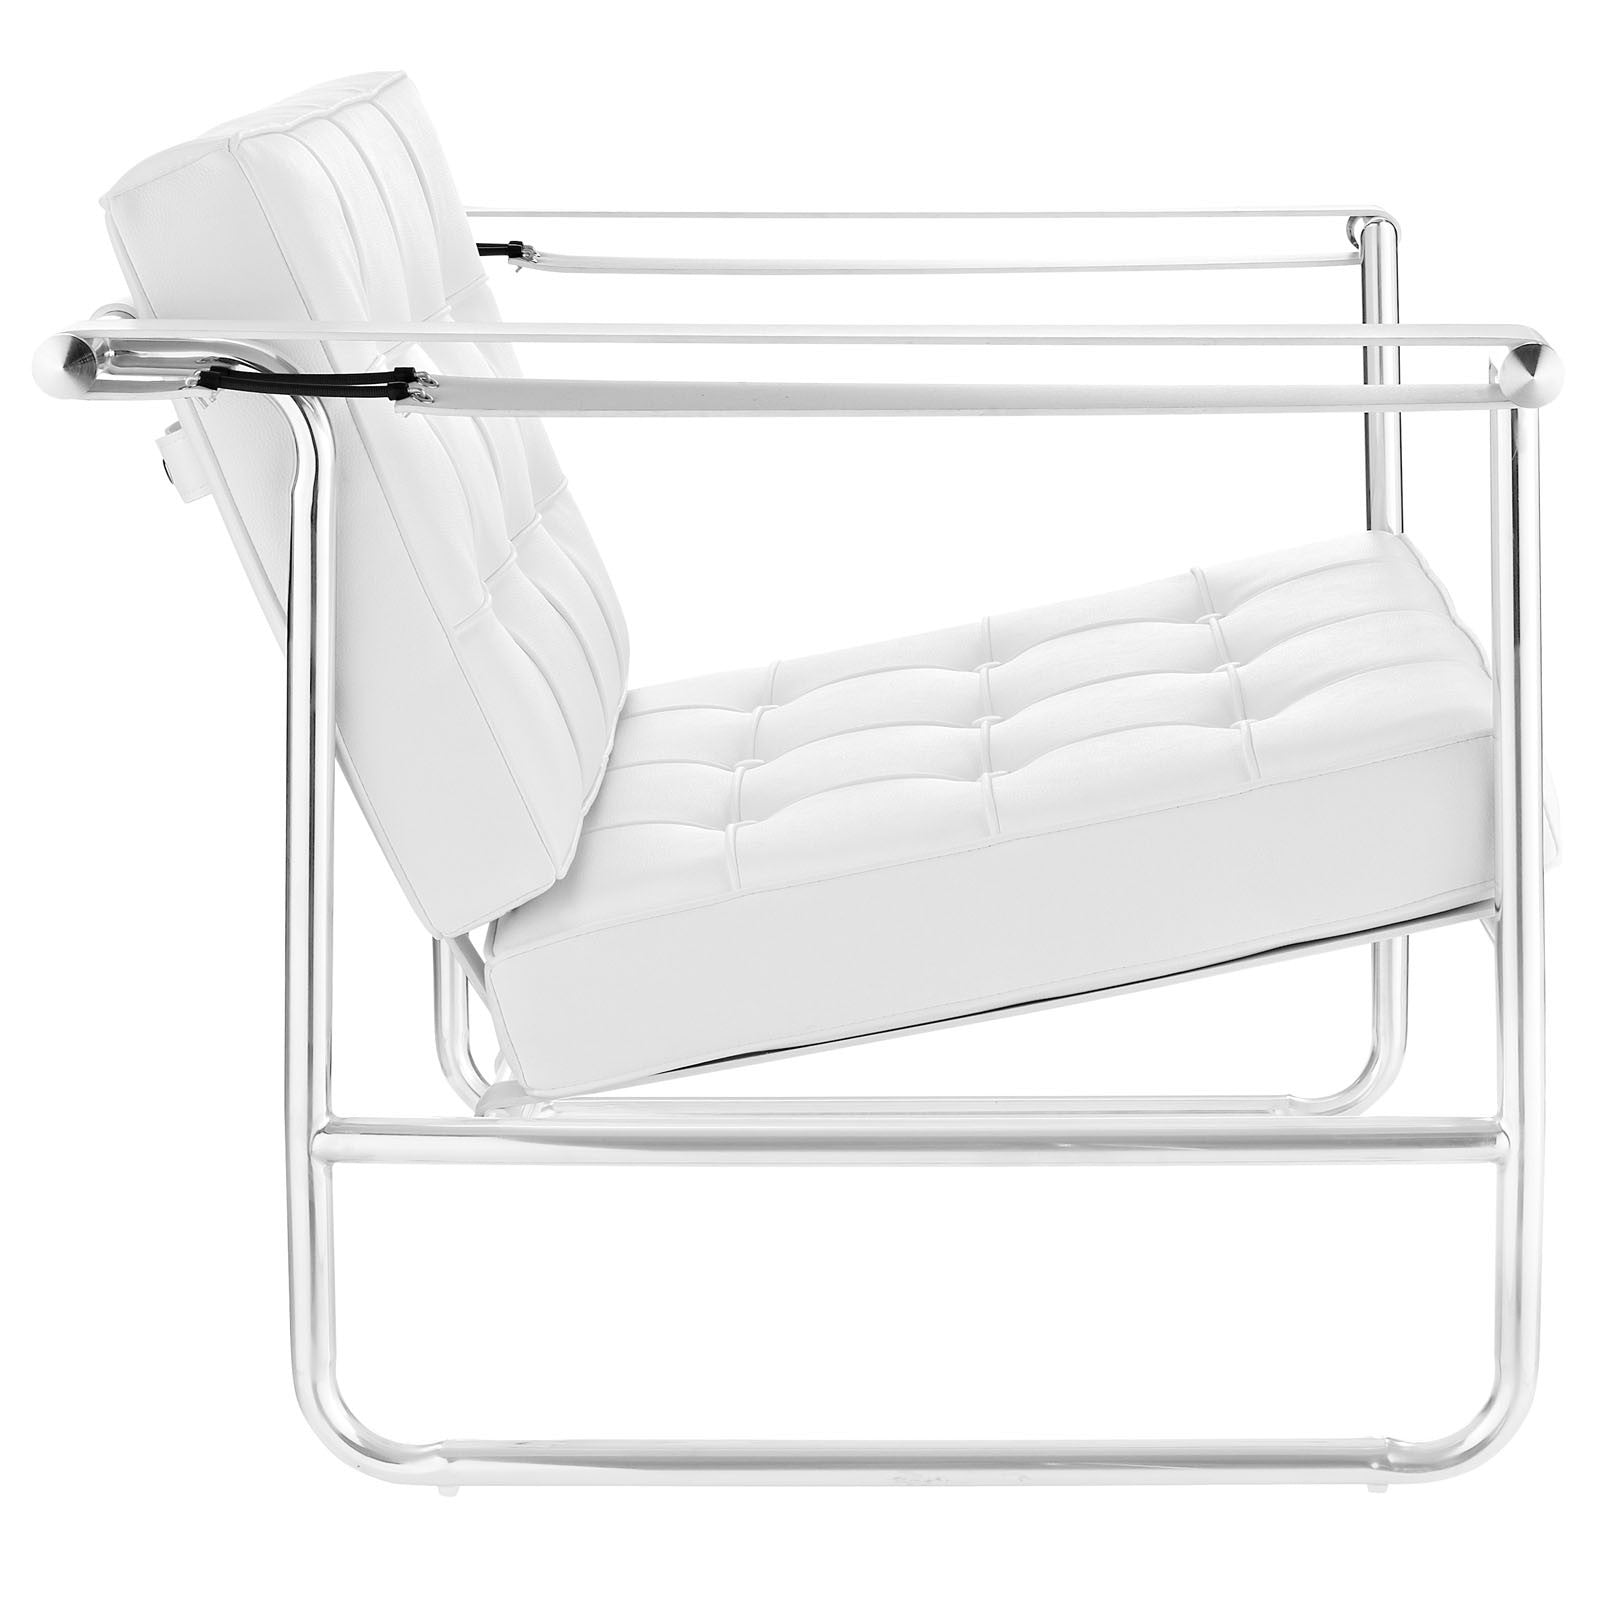 Pero Stainless Steel Lounge Chair White